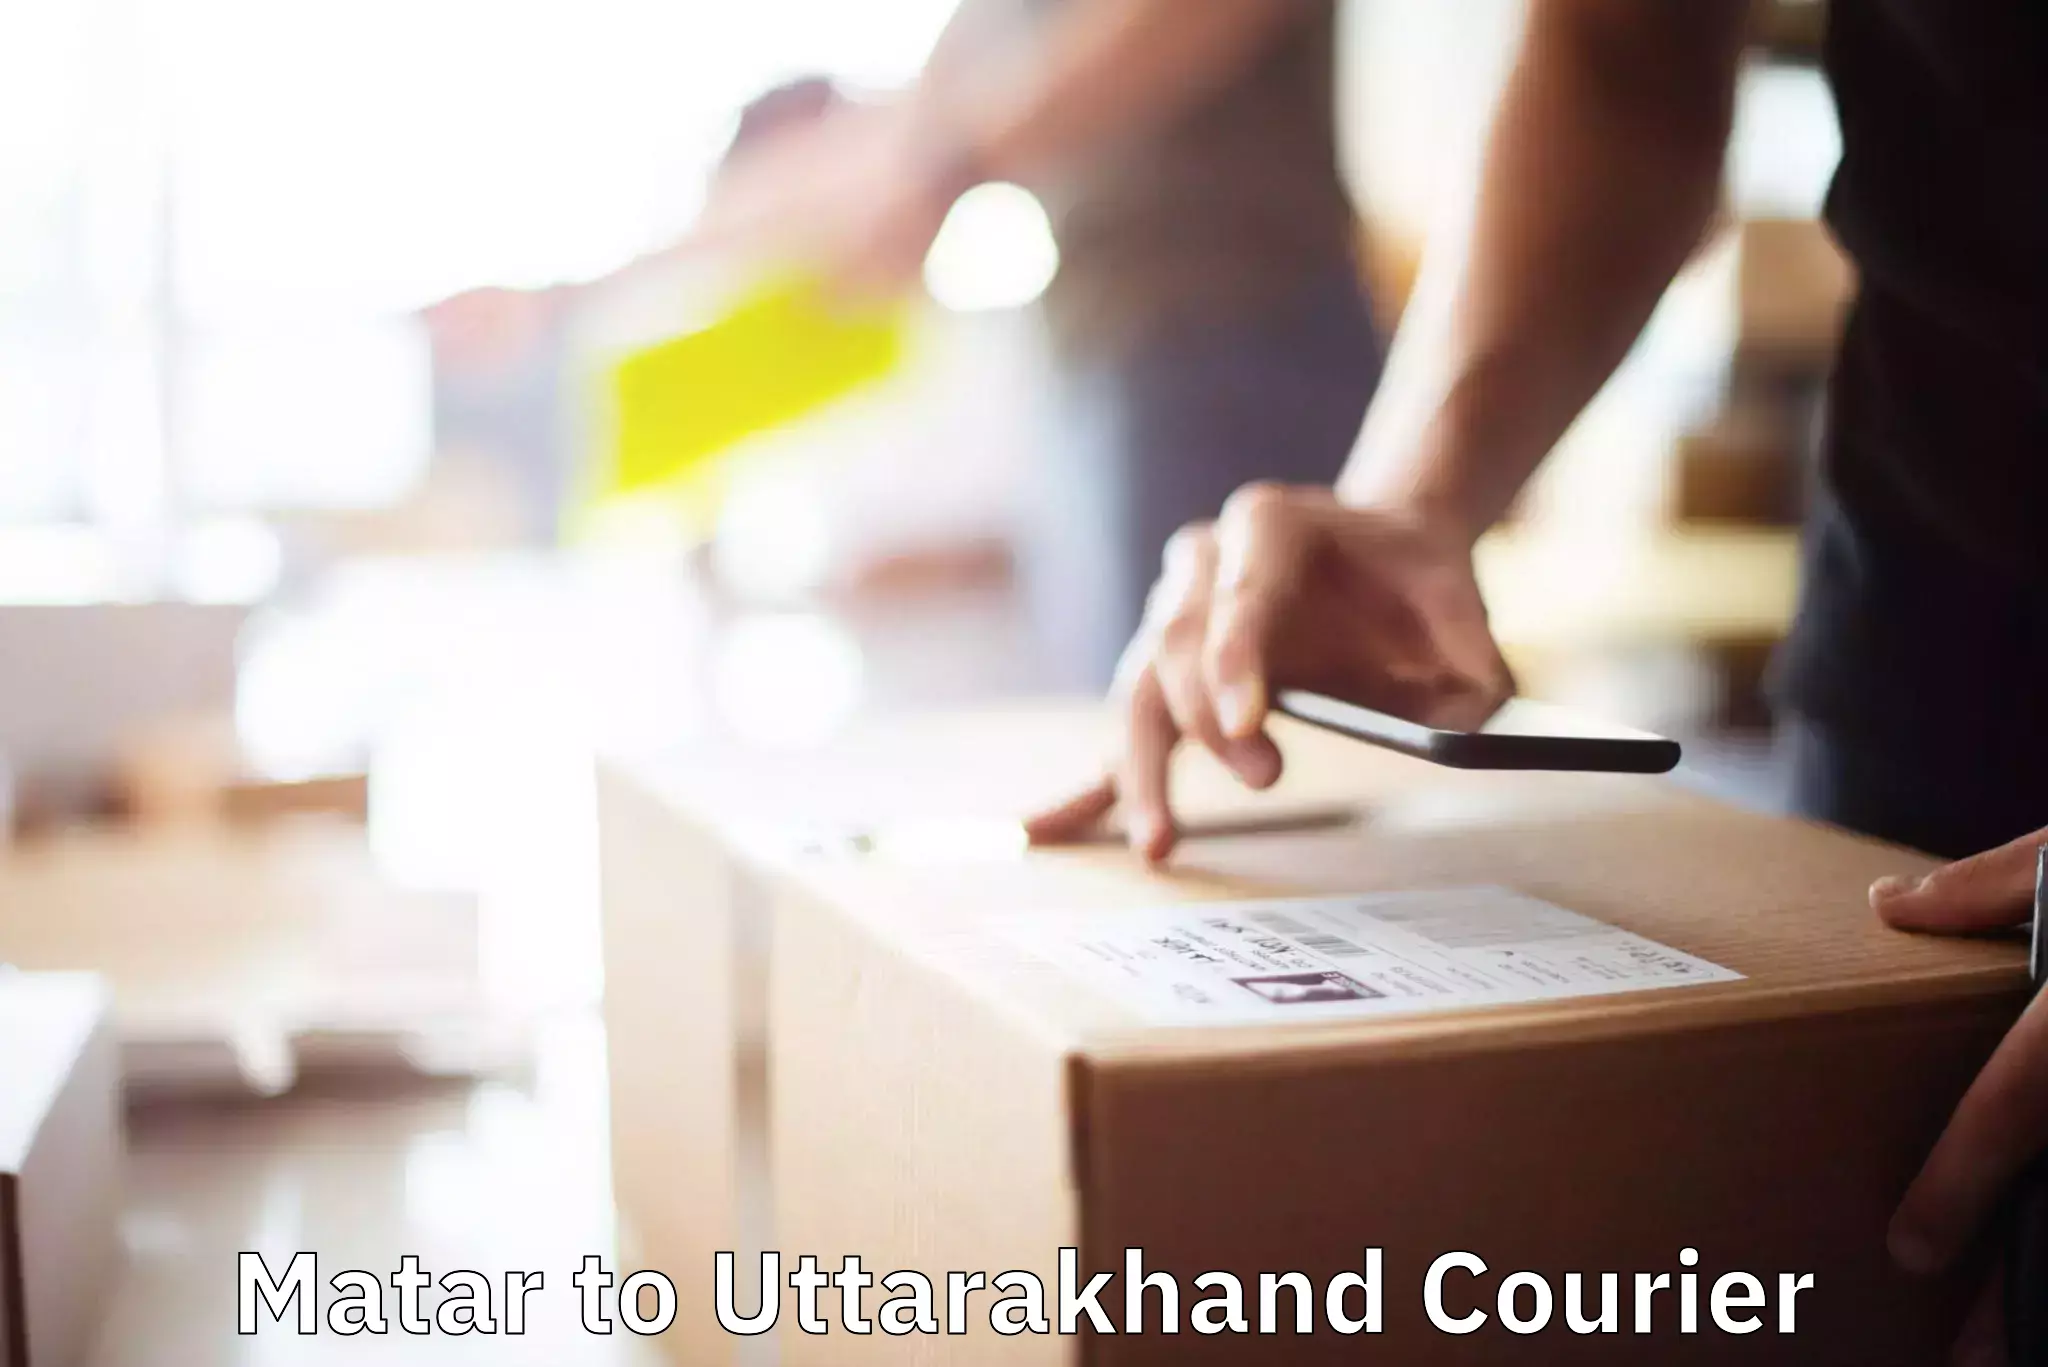 Trusted relocation experts Matar to Uttarakhand